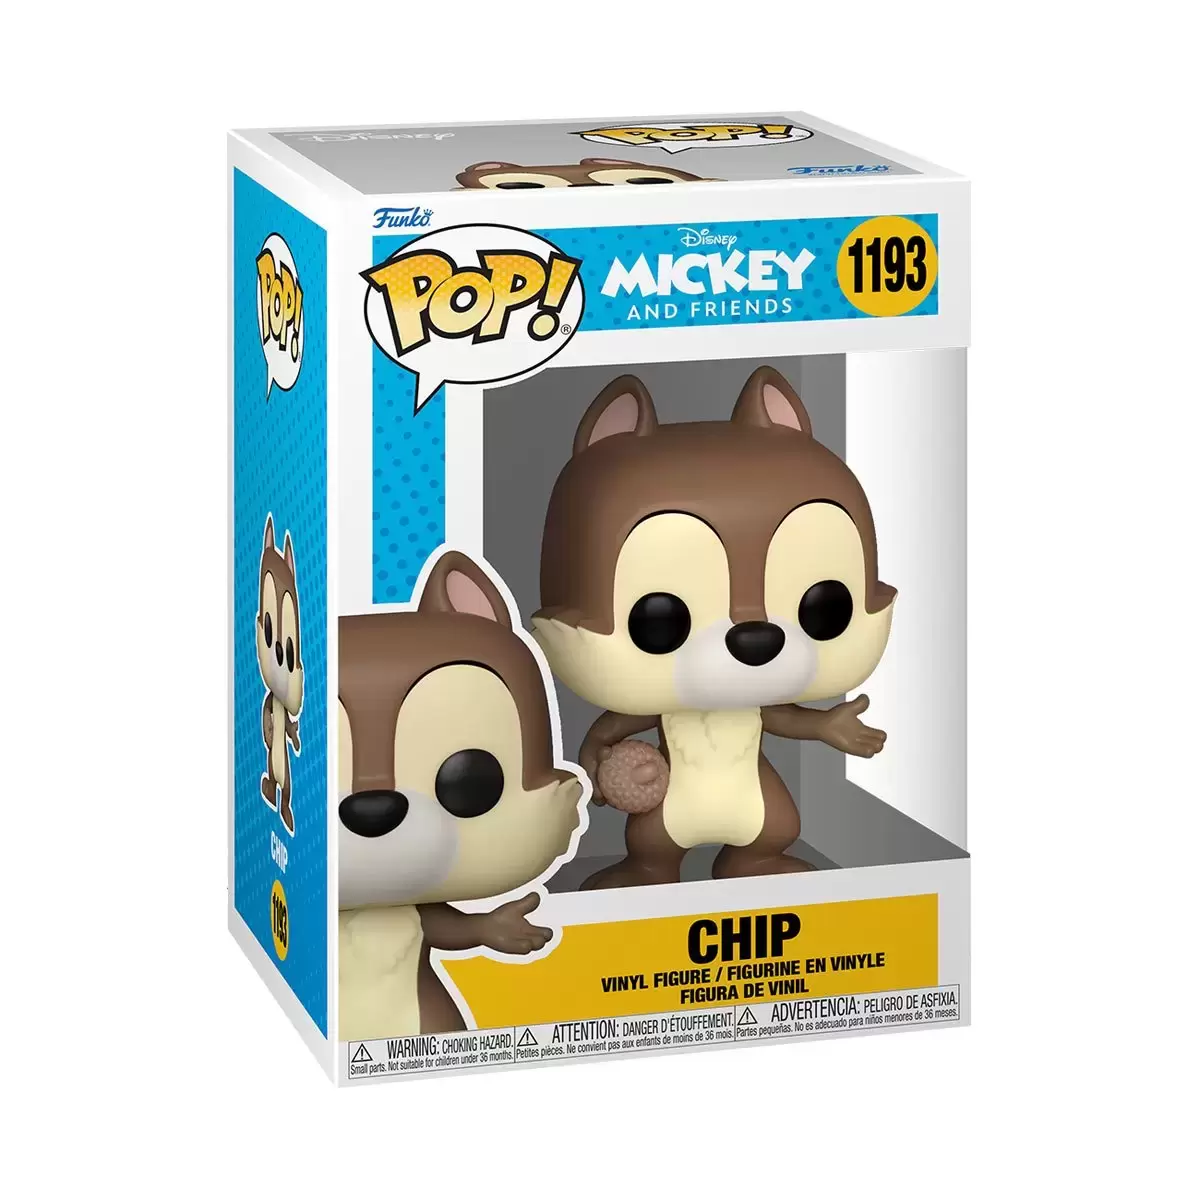 POP! Disney - Mickey and Friends - Chip